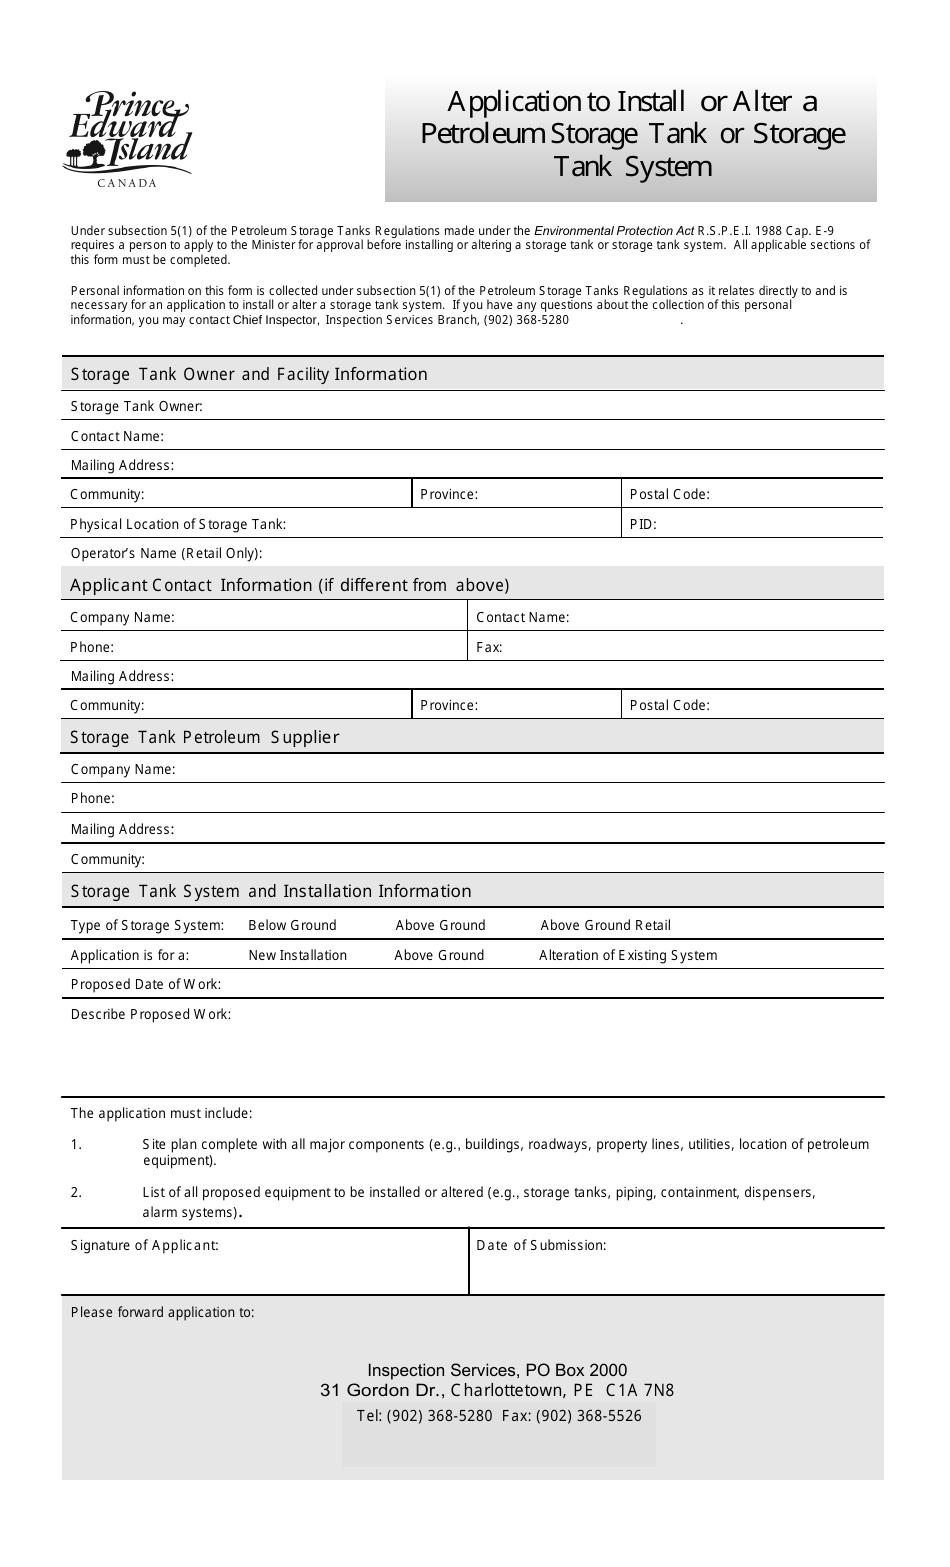 Application to Install or Alter a Petroleum Storage Tank or Storage Tank System - Prince Edward Island, Canada, Page 1